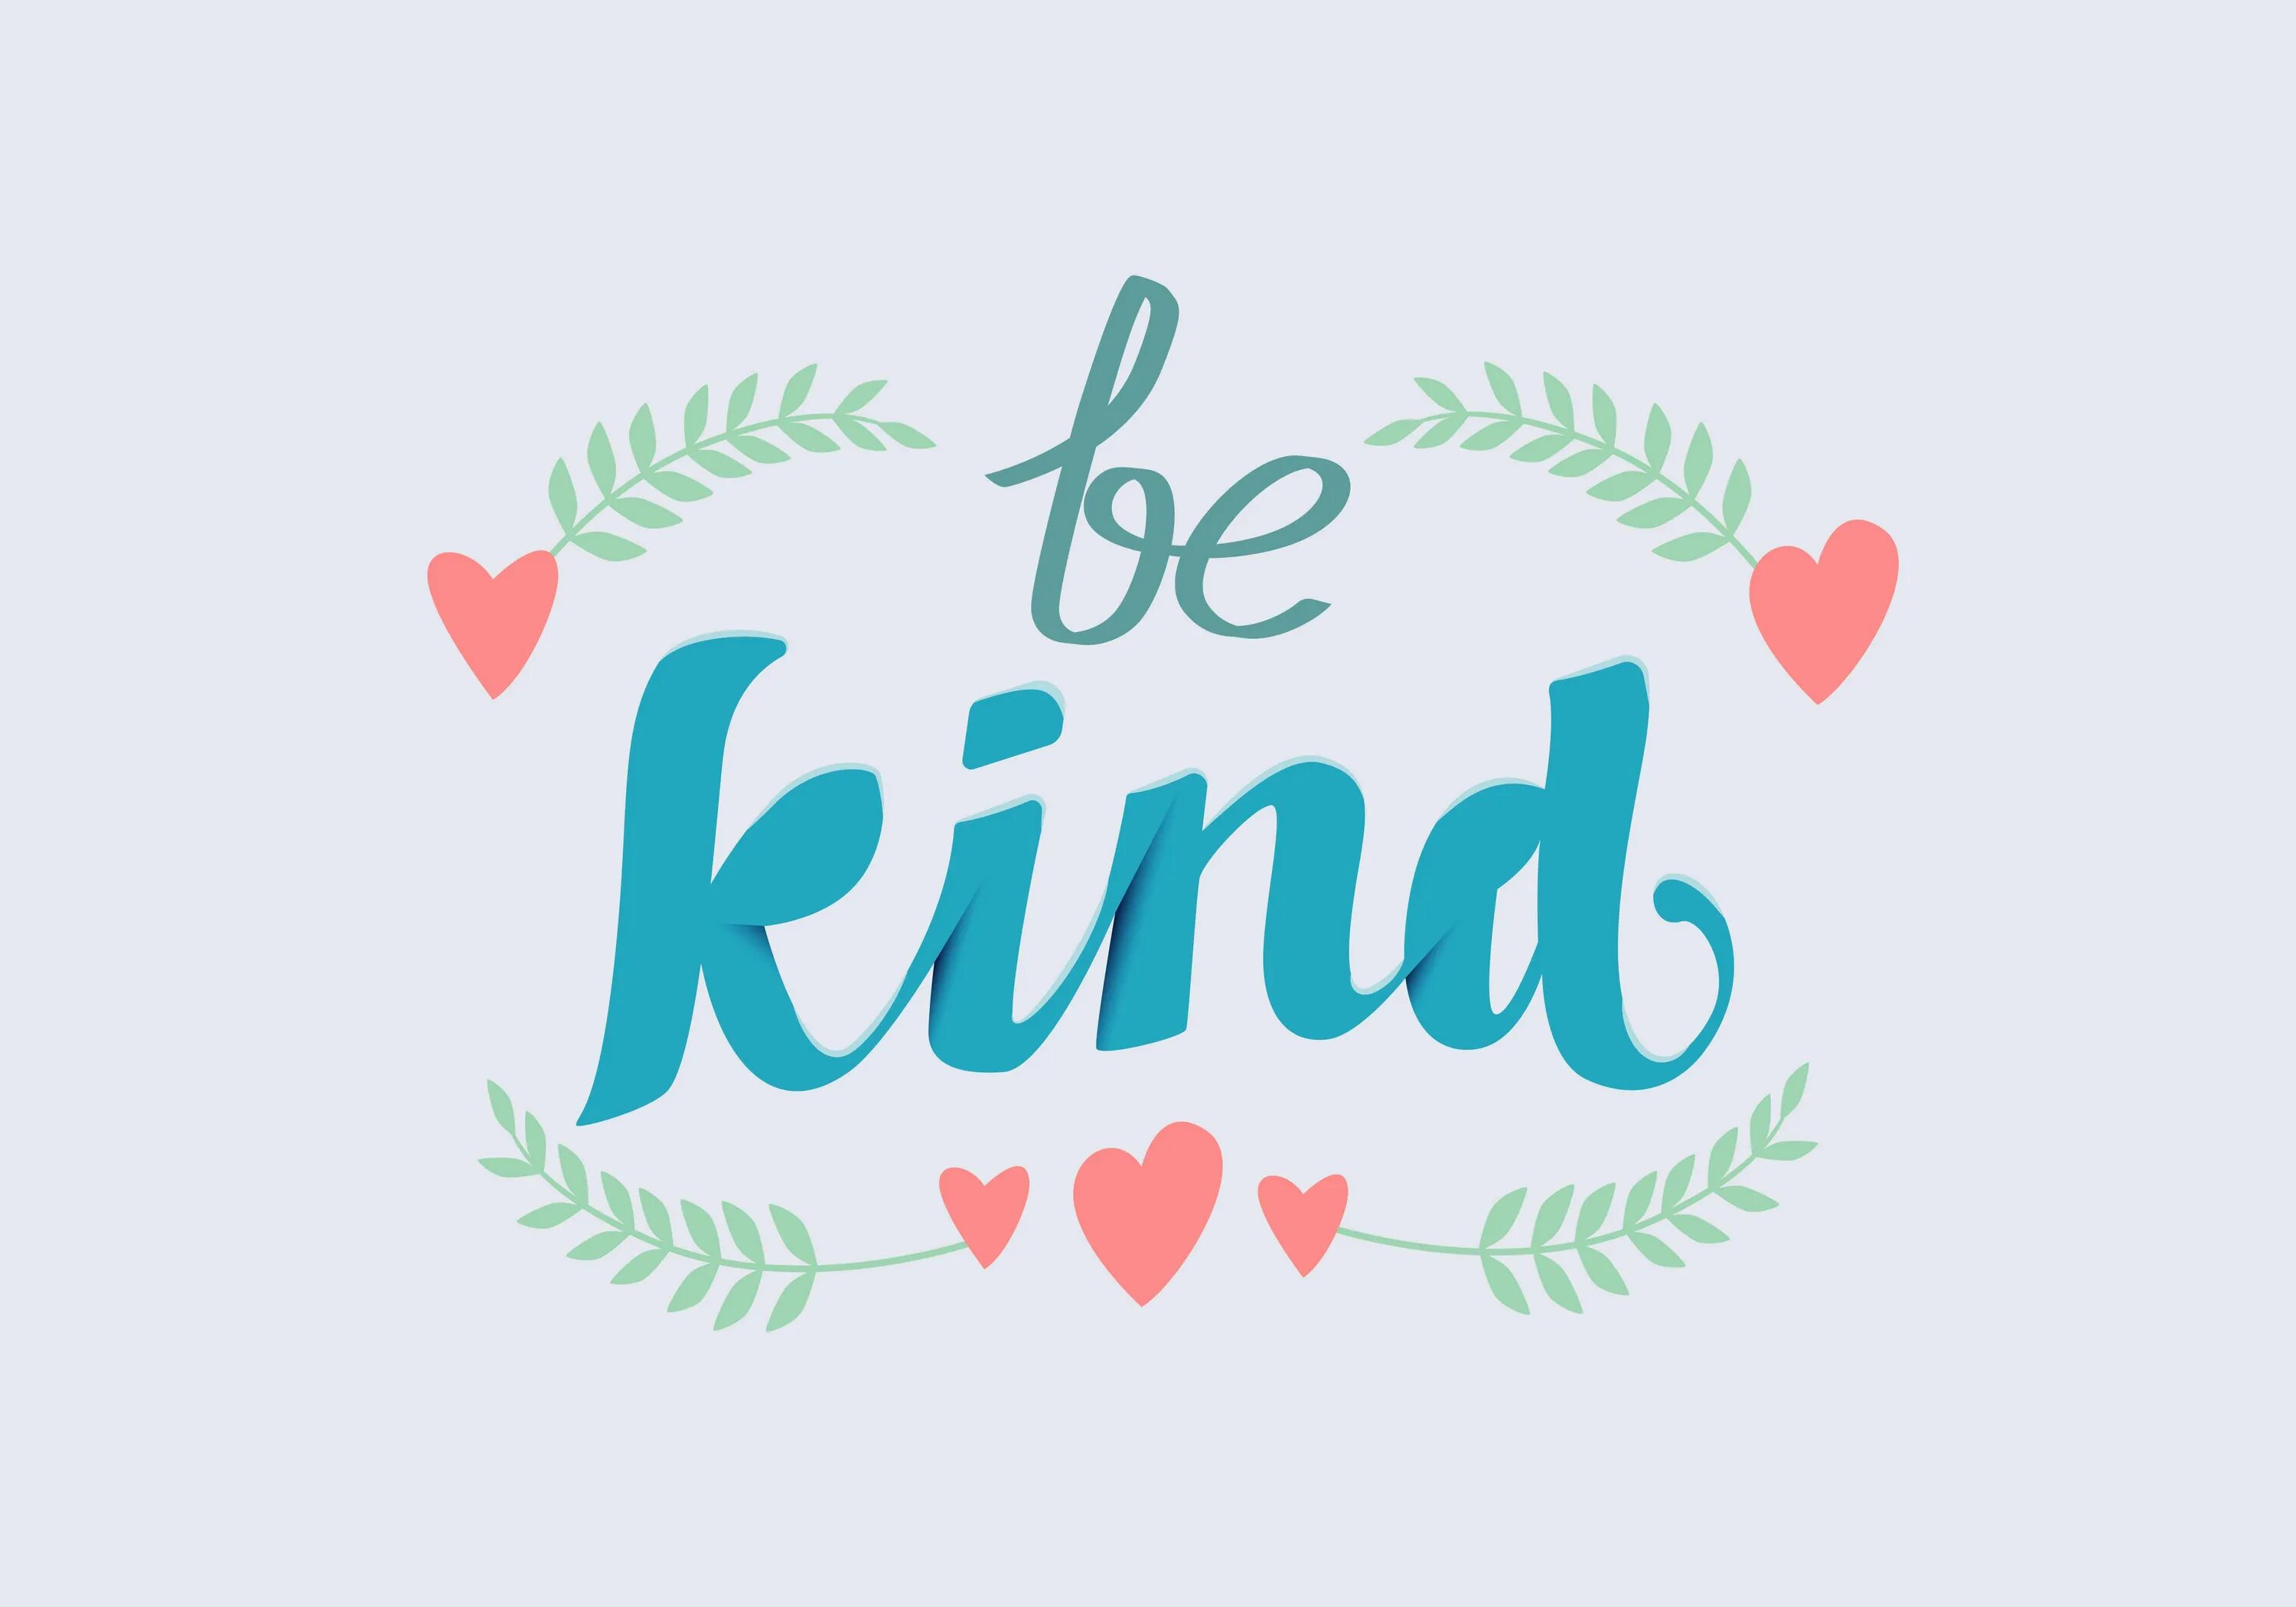 Be kind слова